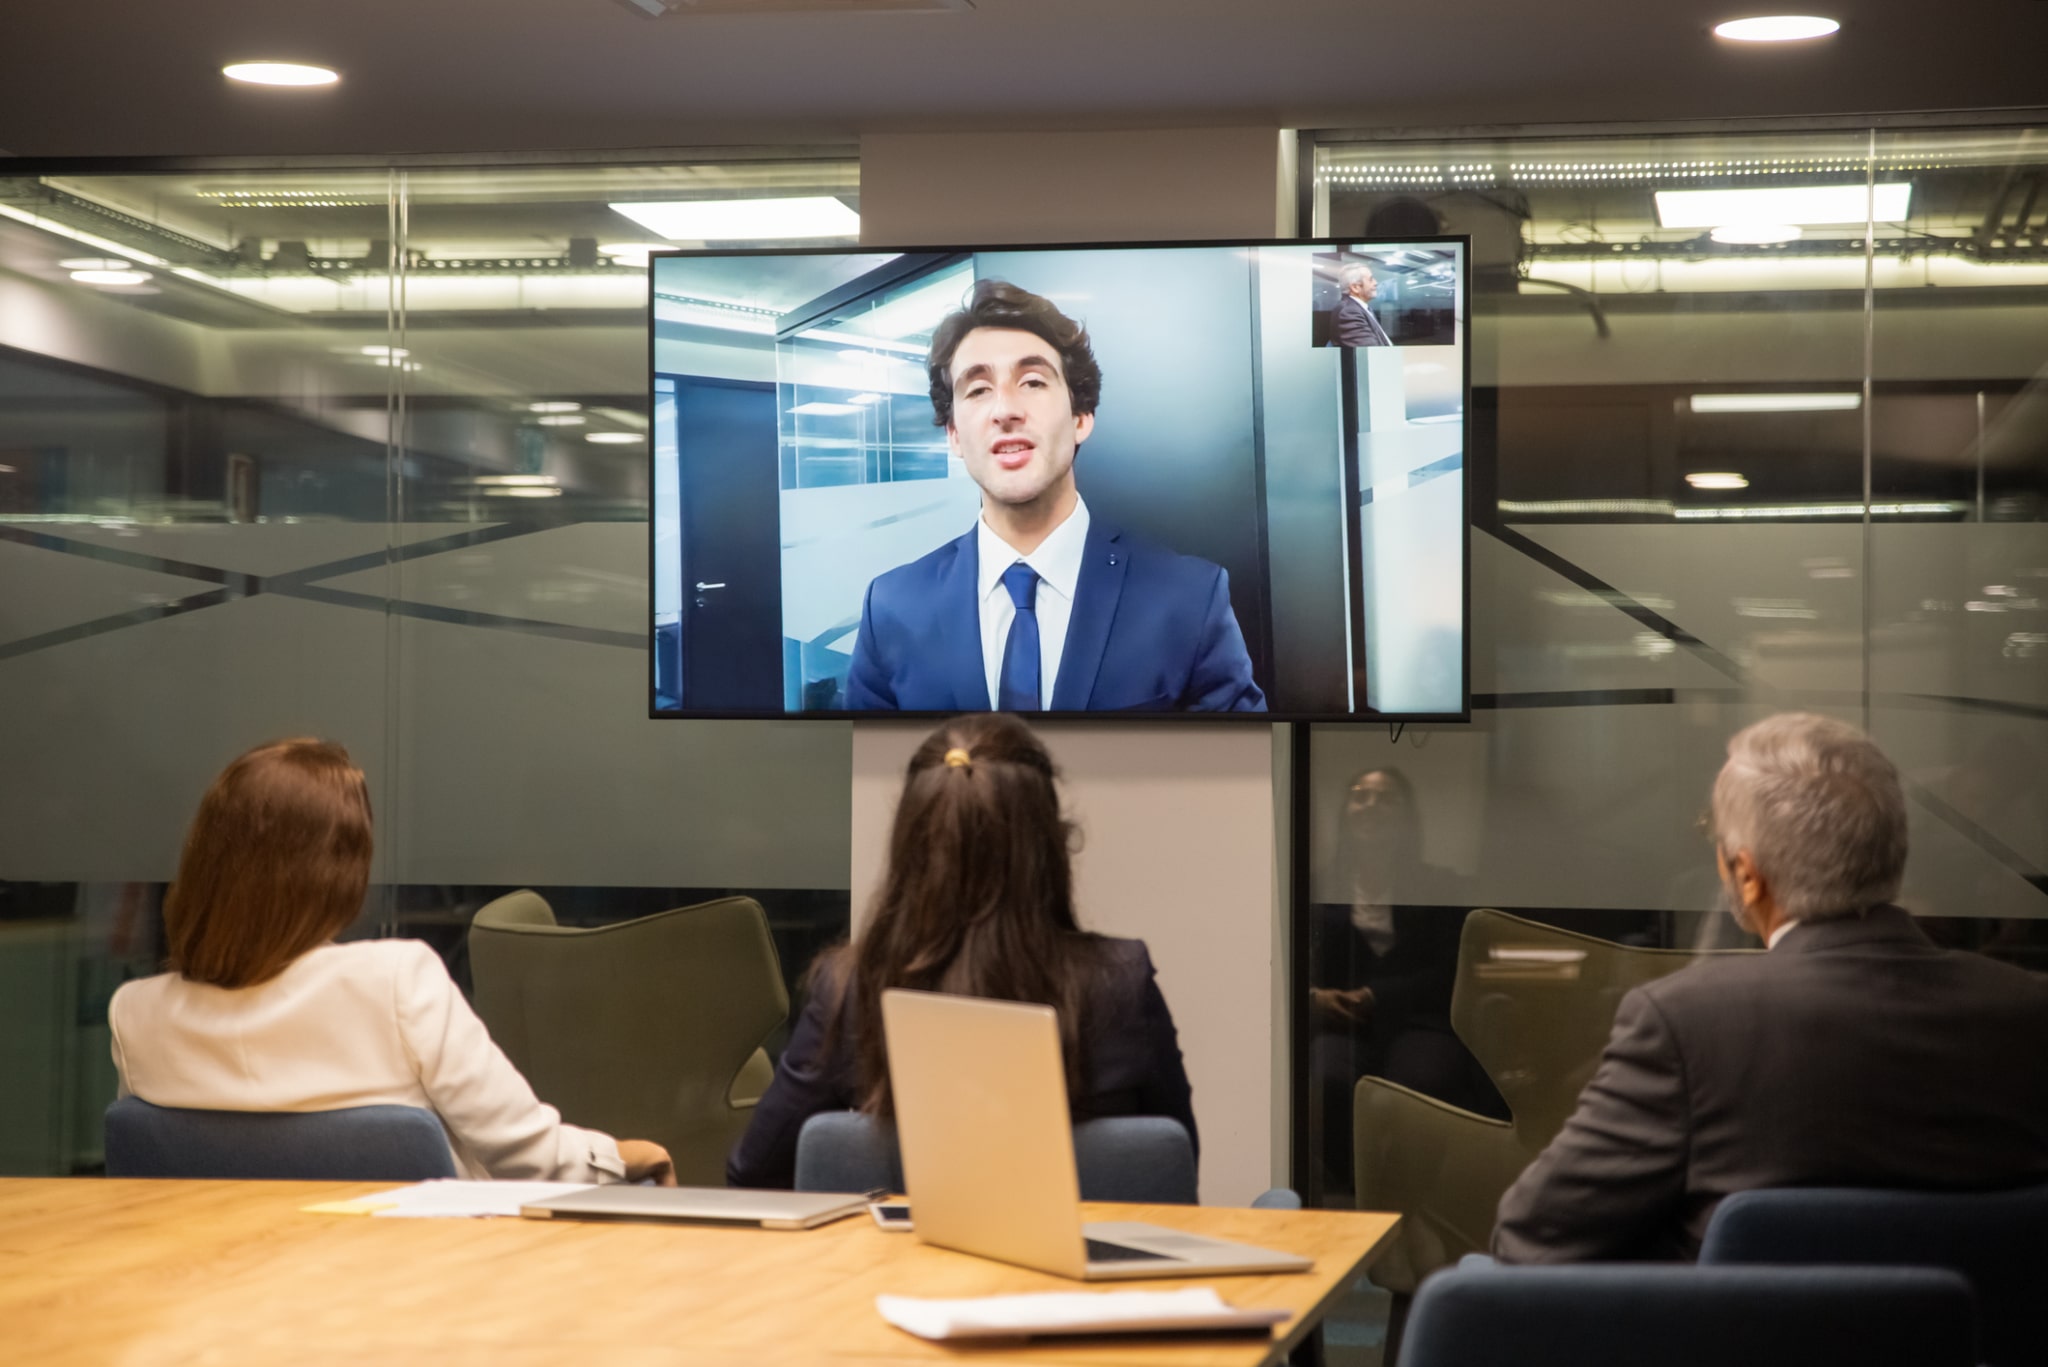 Business people looking at monitor screen during video conference in office.